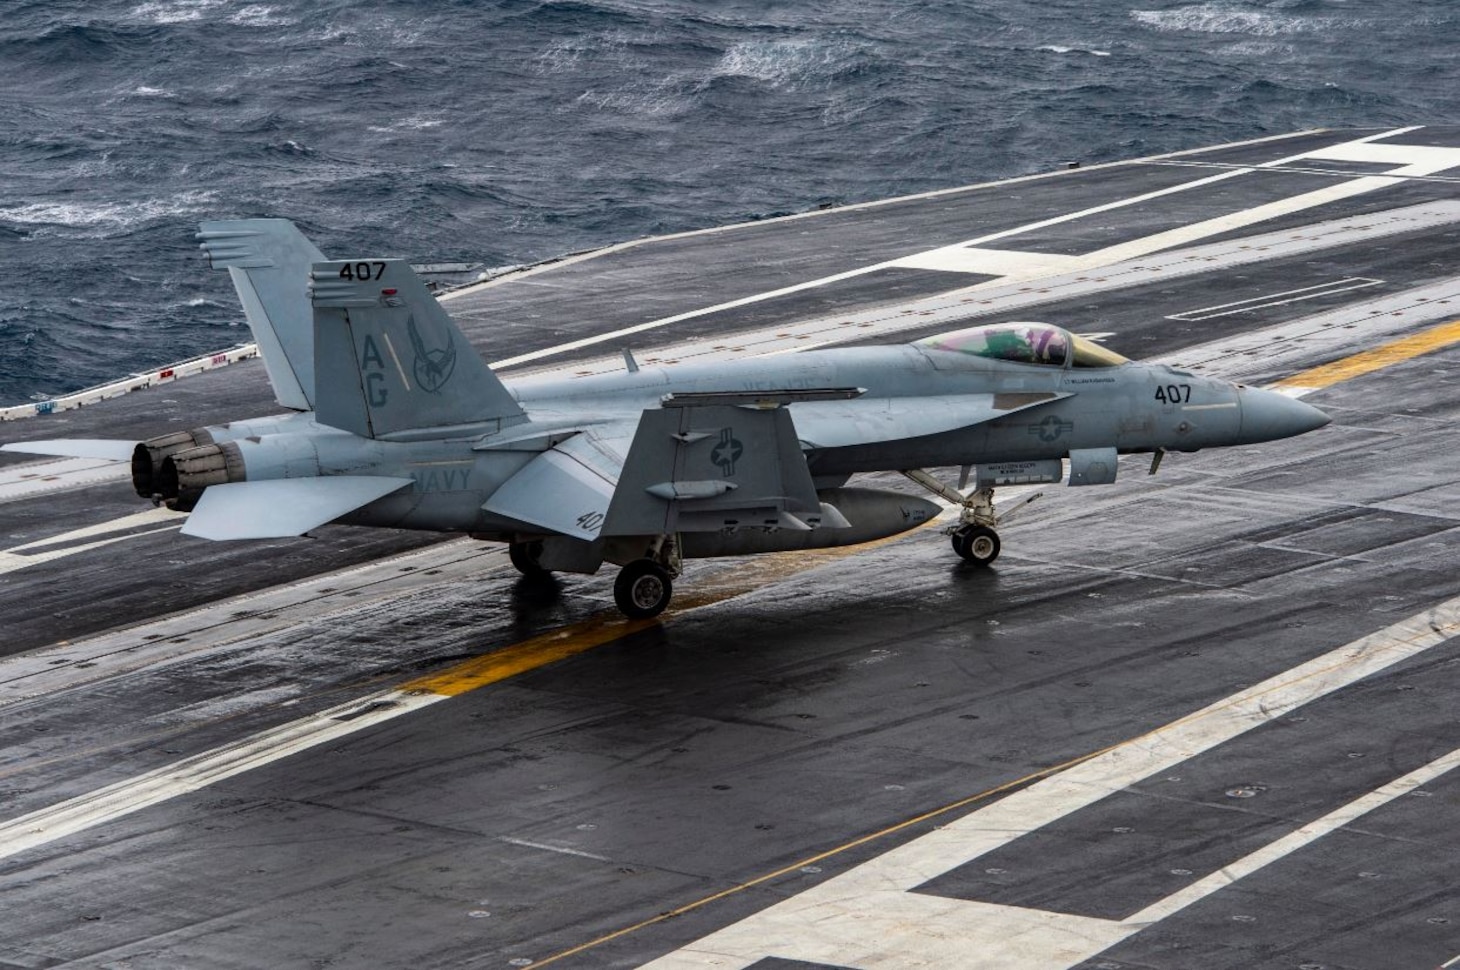 An F/A-18E Super Hornet aircraft, attached to Strike Fighter Squadron (VFA) 136, launches from the aircraft carrier USS George H. W. Bush (CVN 77), June 10, 2022. The George H.W. Bush Carrier Strike Group (GHWBCSG) is underway completing a certification exercise to increase U.S. and allied interoperability and warfighting capability before a future deployment. The George H. W. Bush CSG is an integrated combat weapons system that delivers superior combat capability to deter, and if necessary, defeat America's adversaries in support of national security. Carrier Air Wing (CVW) 7 is the offensive air and strike component of CSG-10 and the GHWBCSG. The squadrons of CVW-7 are VFA-143, VFA-103, VFA-86, VFA-136, Electronic Attack Squadron (VAQ) 140, Carrier Airborne Early Warning Squadron (VAW) 121, Helicopter Sea Combat Squadron (HSC) 5, and Helicopter Maritime Strike Squadron (HSM) 46.